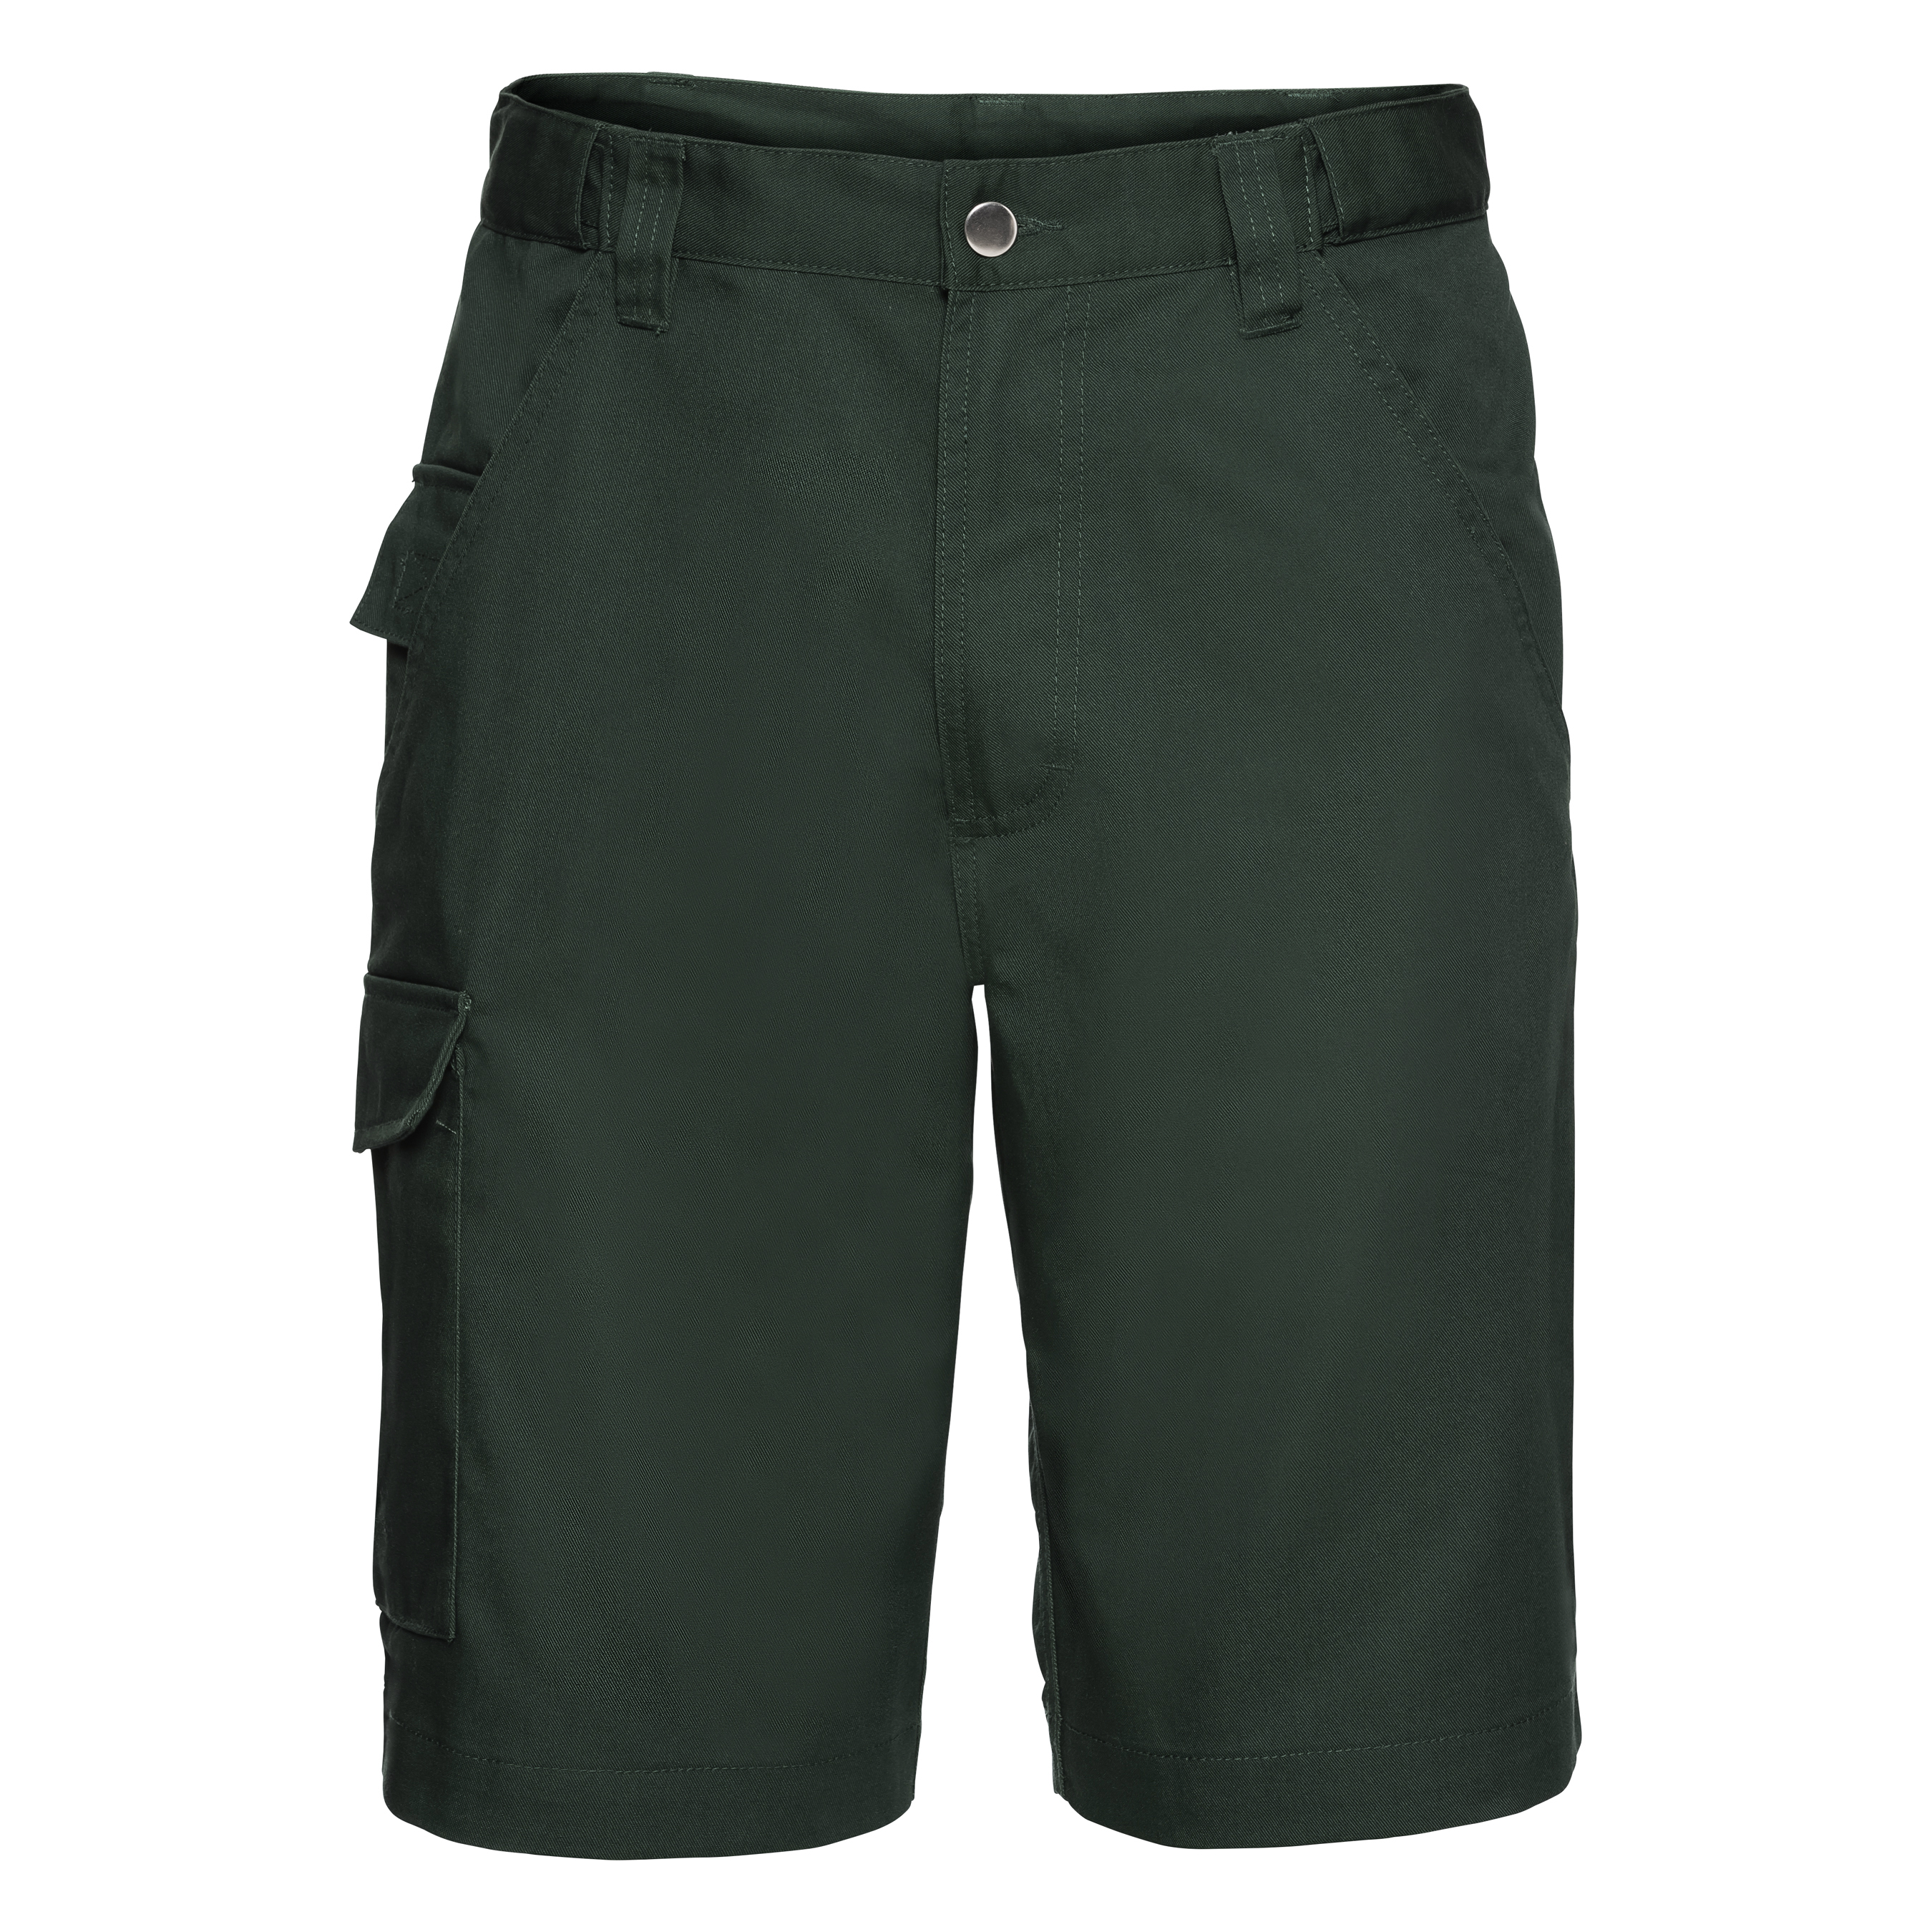 ax-httpswebsystems.s3.amazonaws.comtmp_for_downloadrussell-polycotton-twill-workwear-shorts-bottle-green.jpeg.jpg